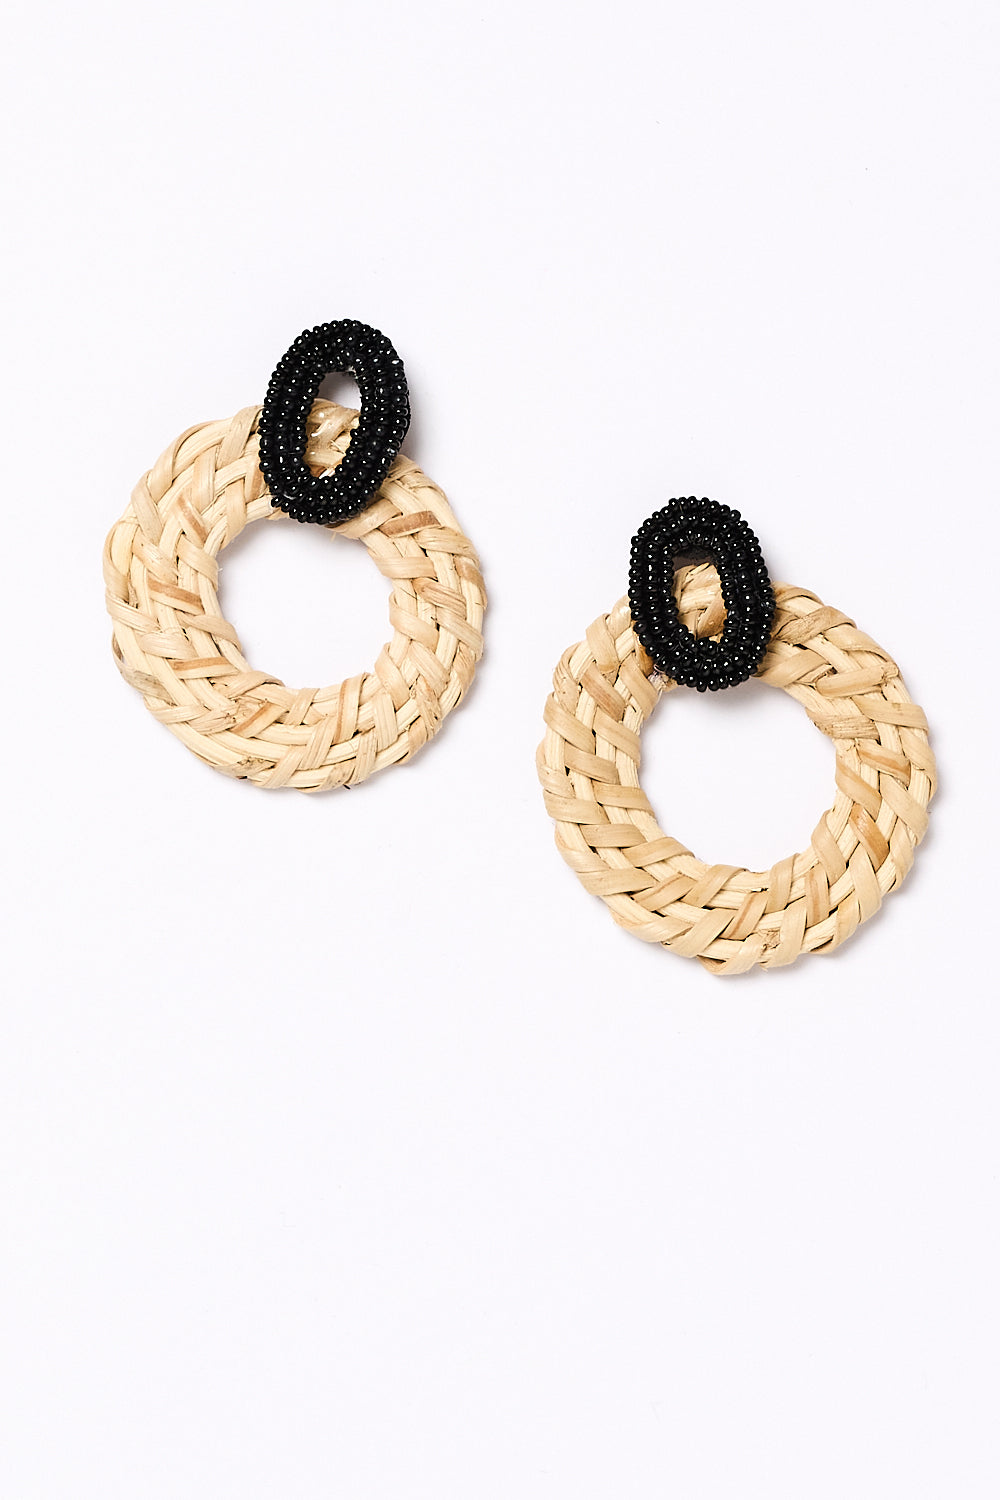 Beaded Circle Weave Earrings in Black and Natural